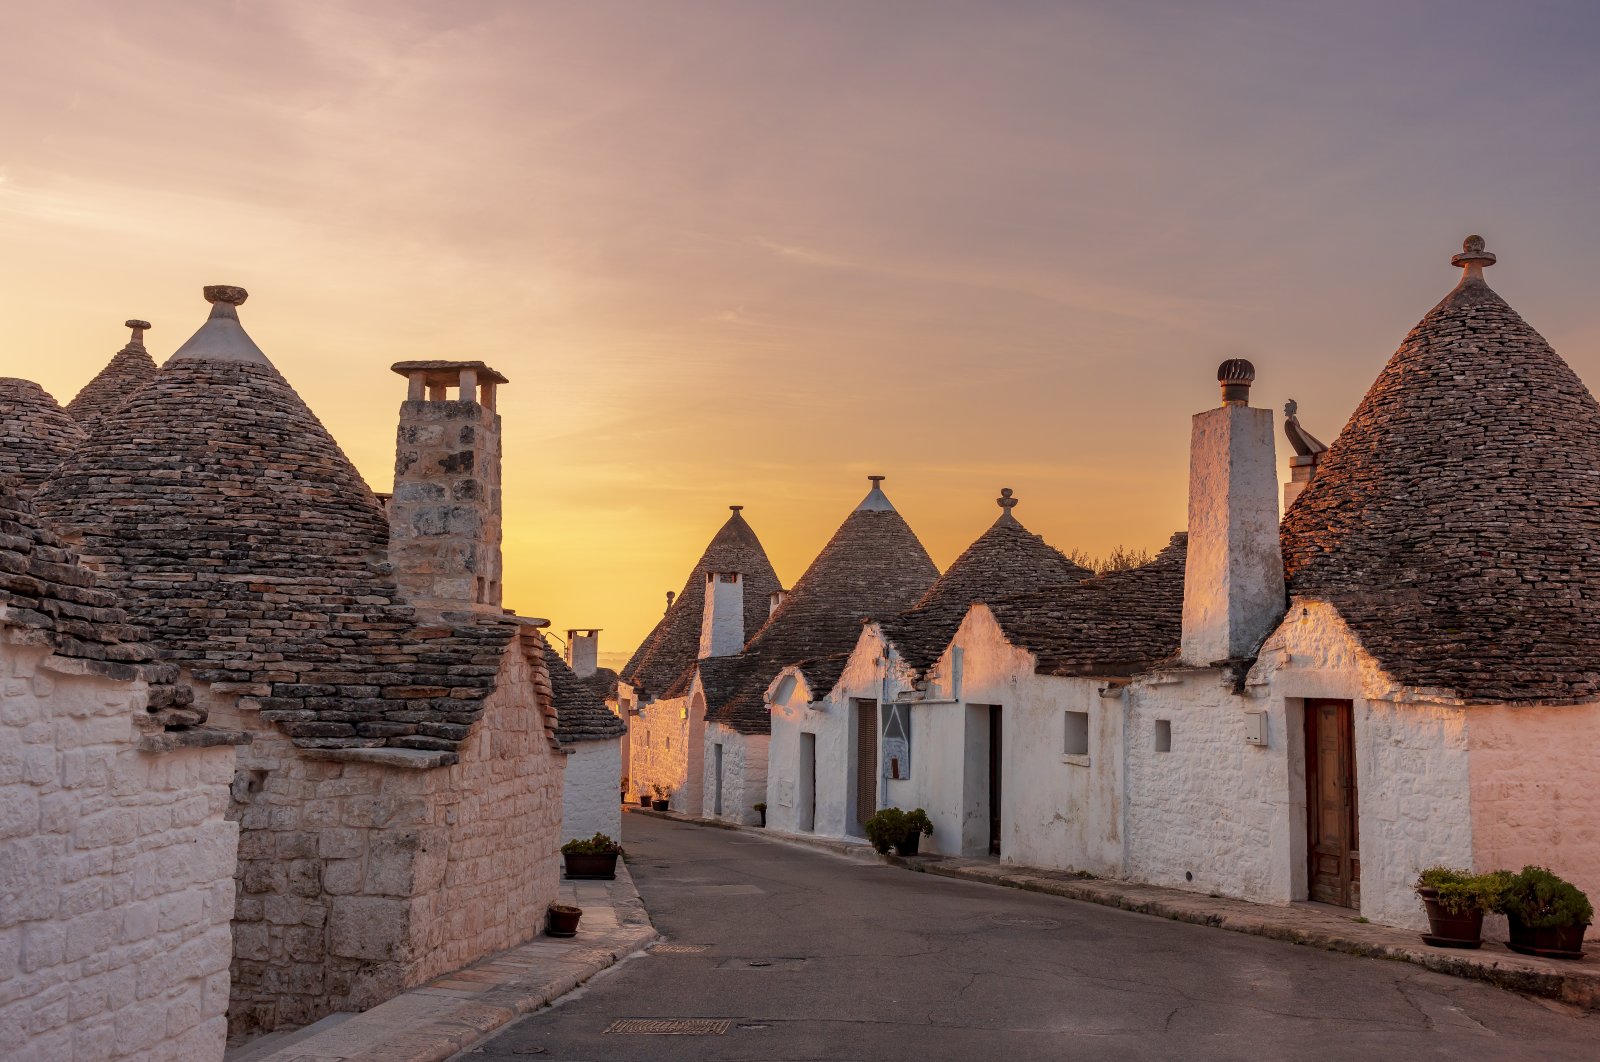 Typical white houses in Alberobello called Trulli at sunrise, Puglia, Italy, Febr. 17, 2023. (Getty Images)